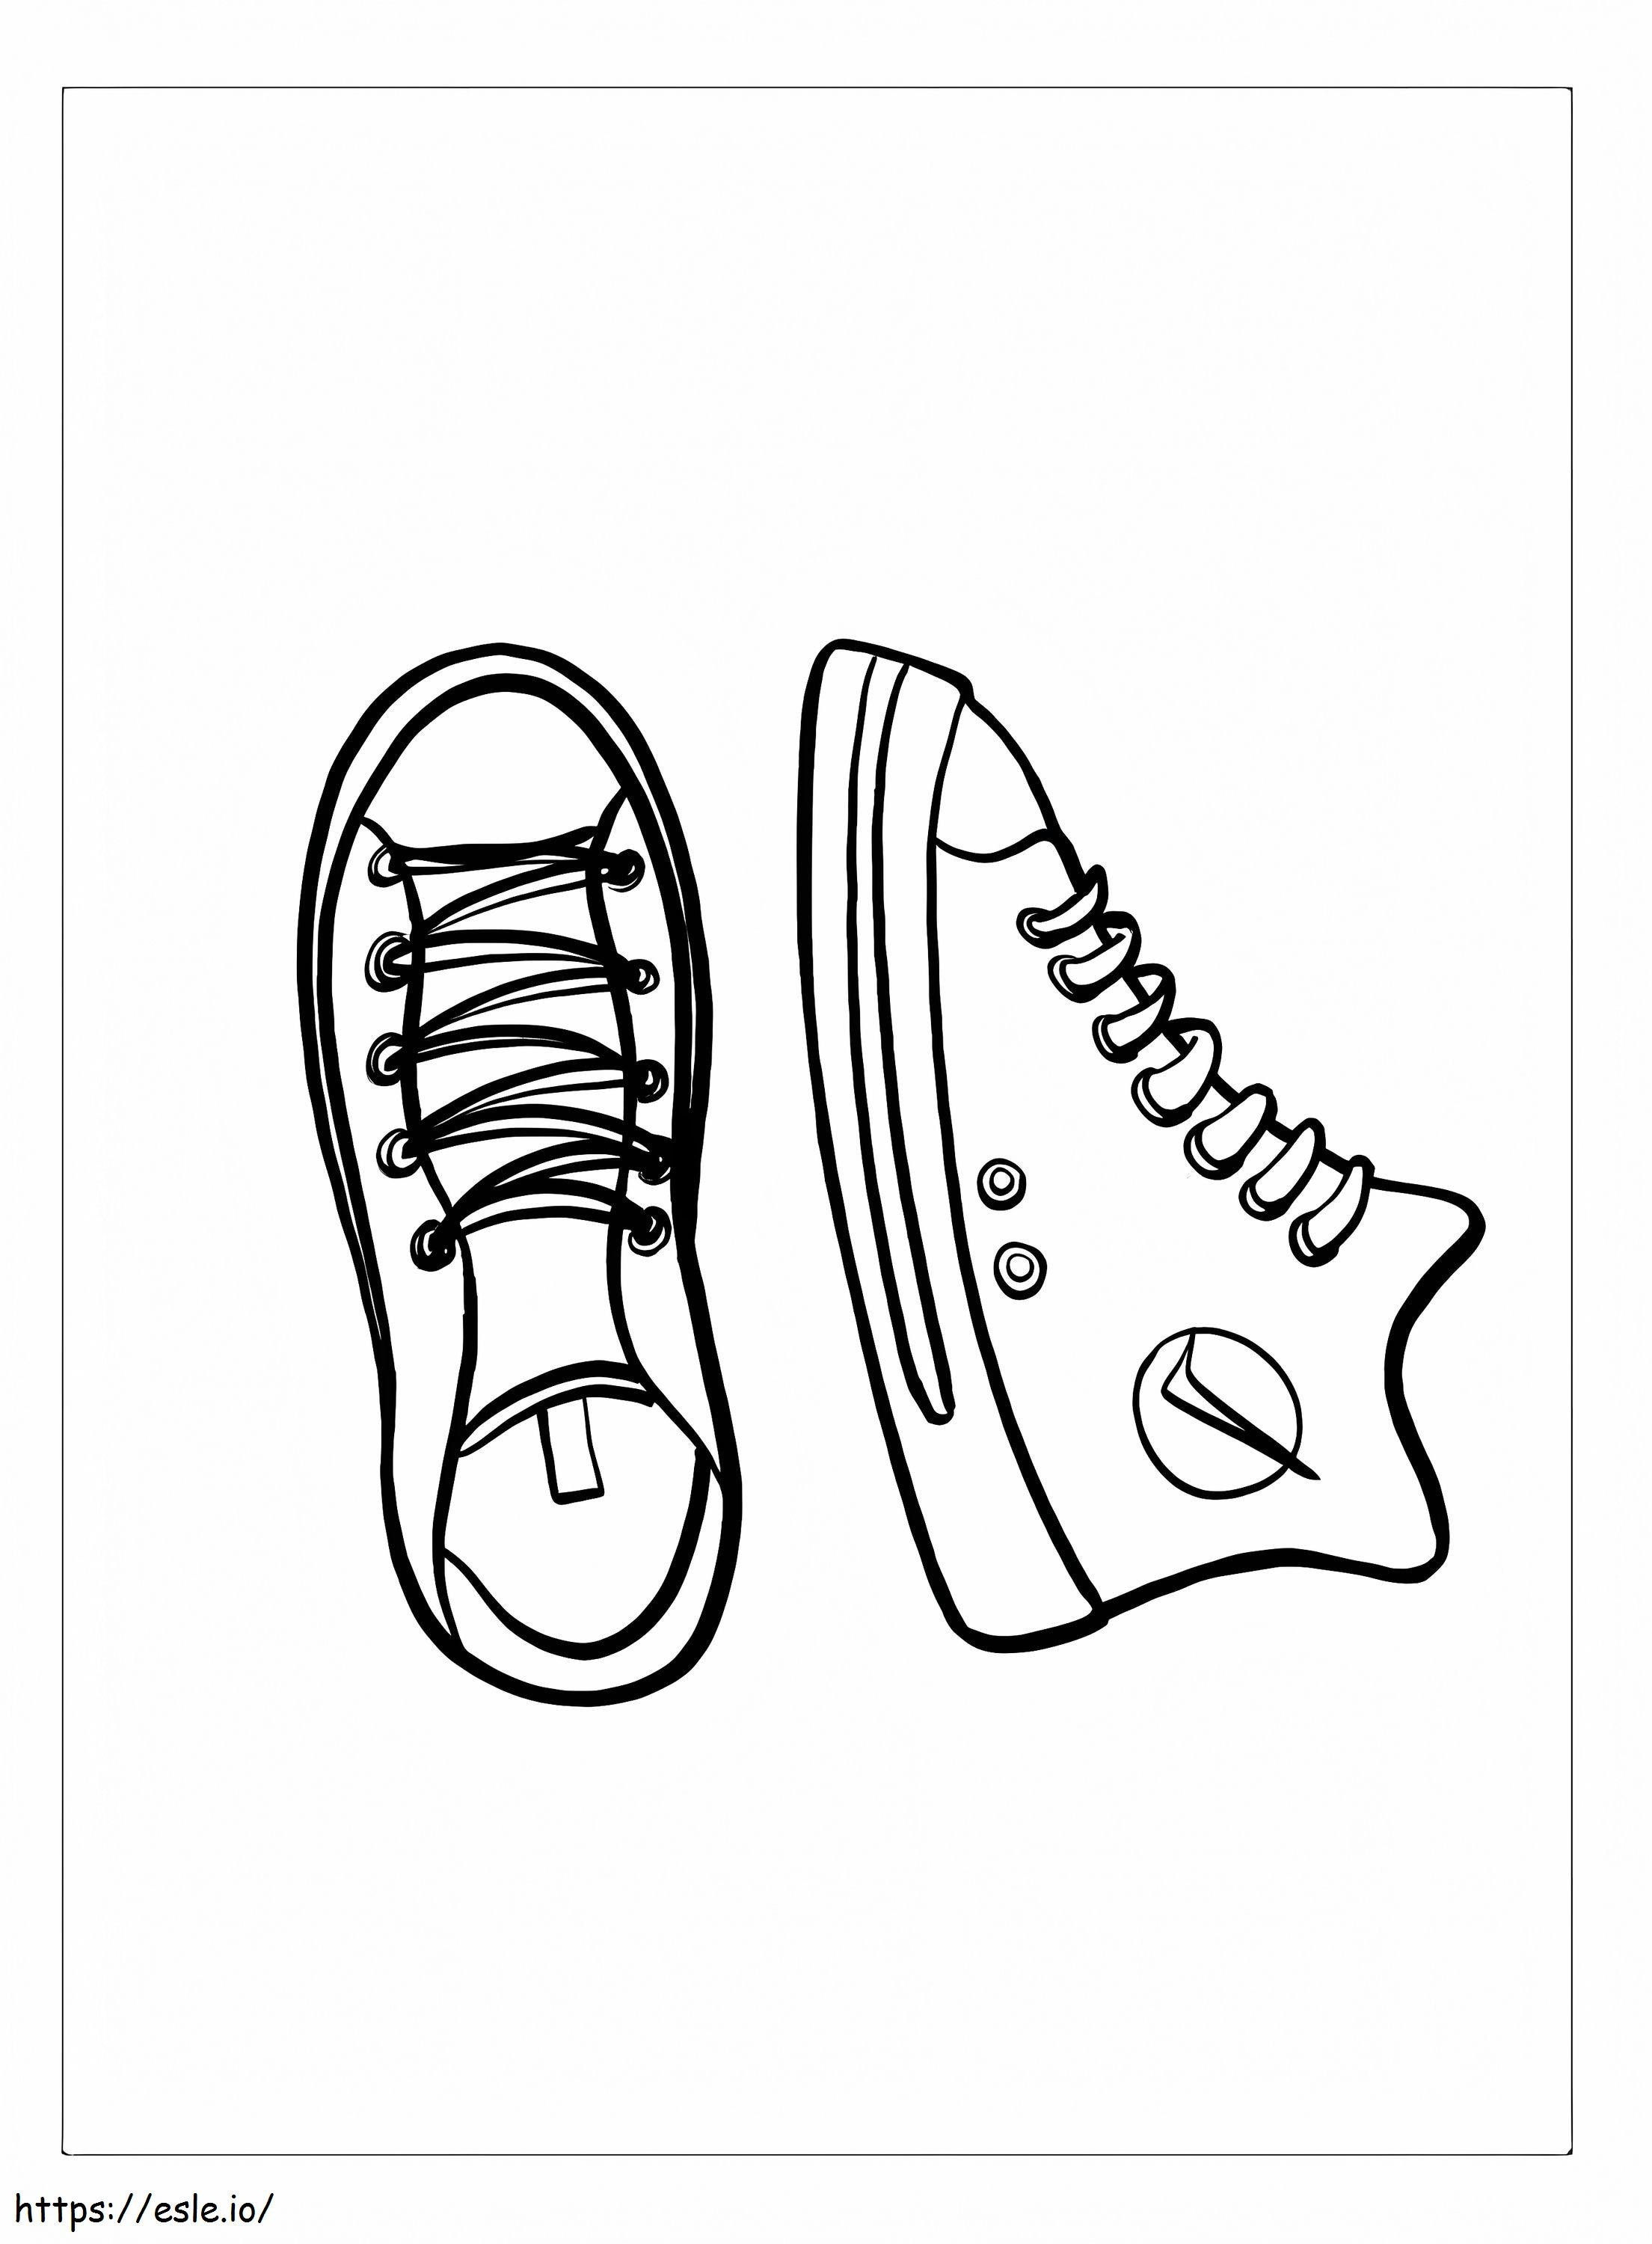 Perfect Shoes coloring page